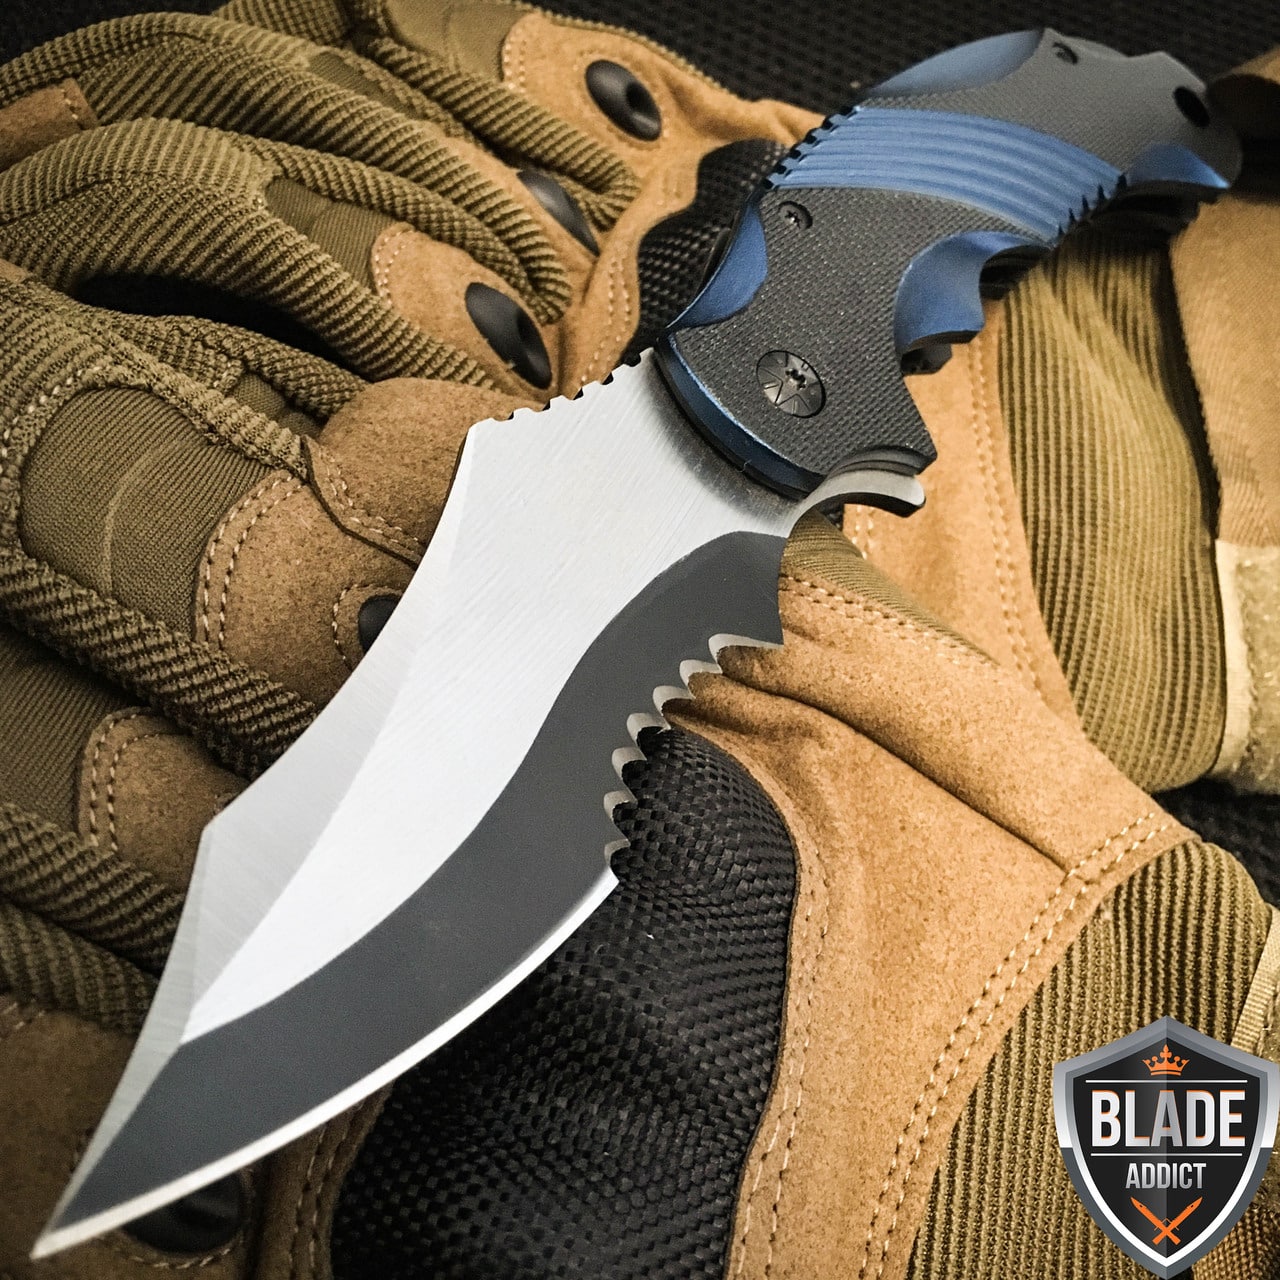 MTECH EXTREME BALLISTIC ARMY Tactical Military Spring Assisted Pocket Knife BLUE